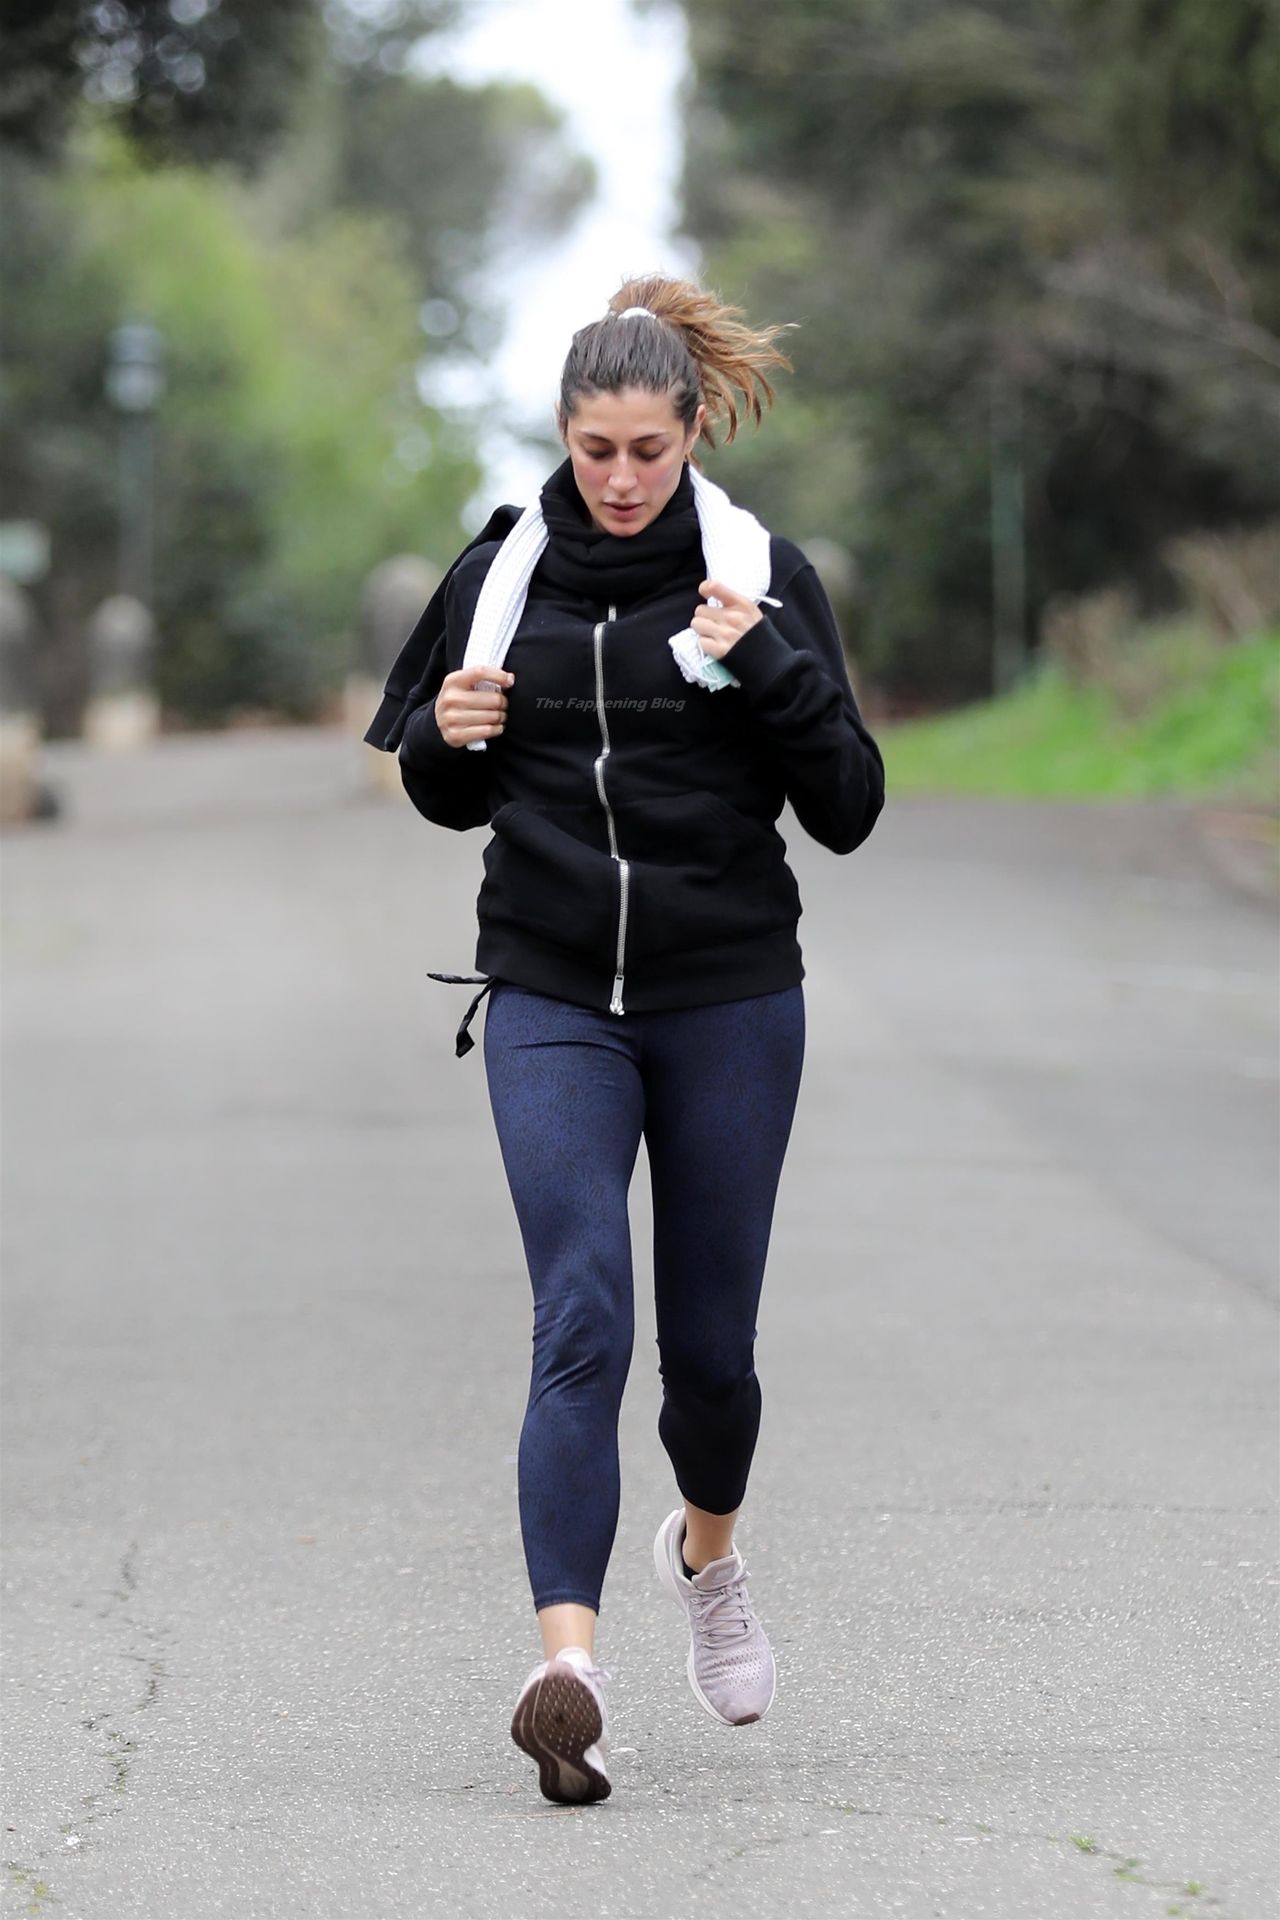 Elisa Isoardi Works Out in a Park in Rome (22 Photos)